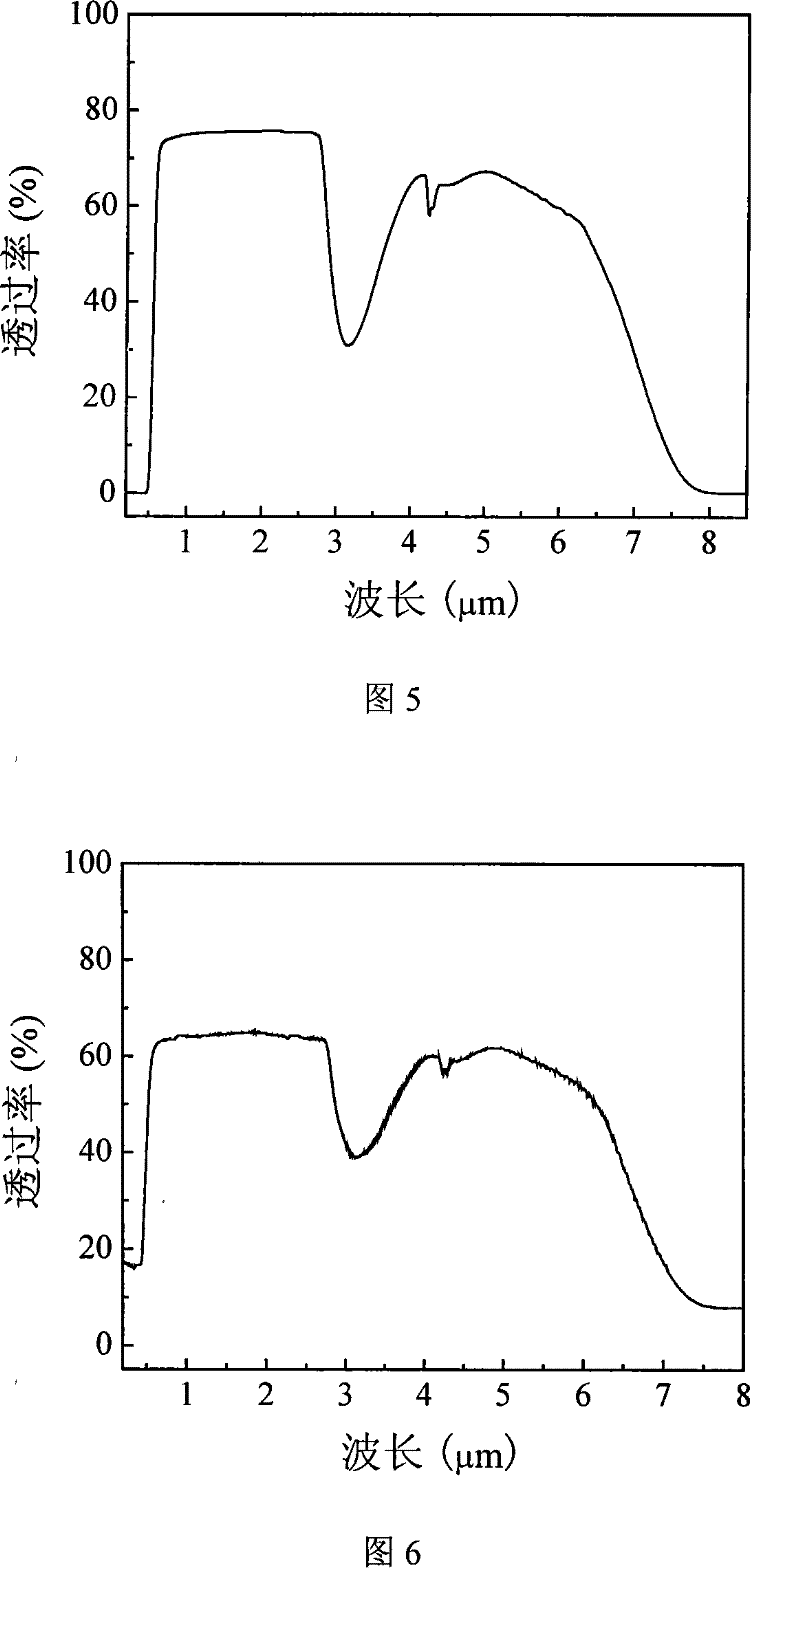 Alkali metal lanthanum bismuthate gallate infrared optical glass and method for making same